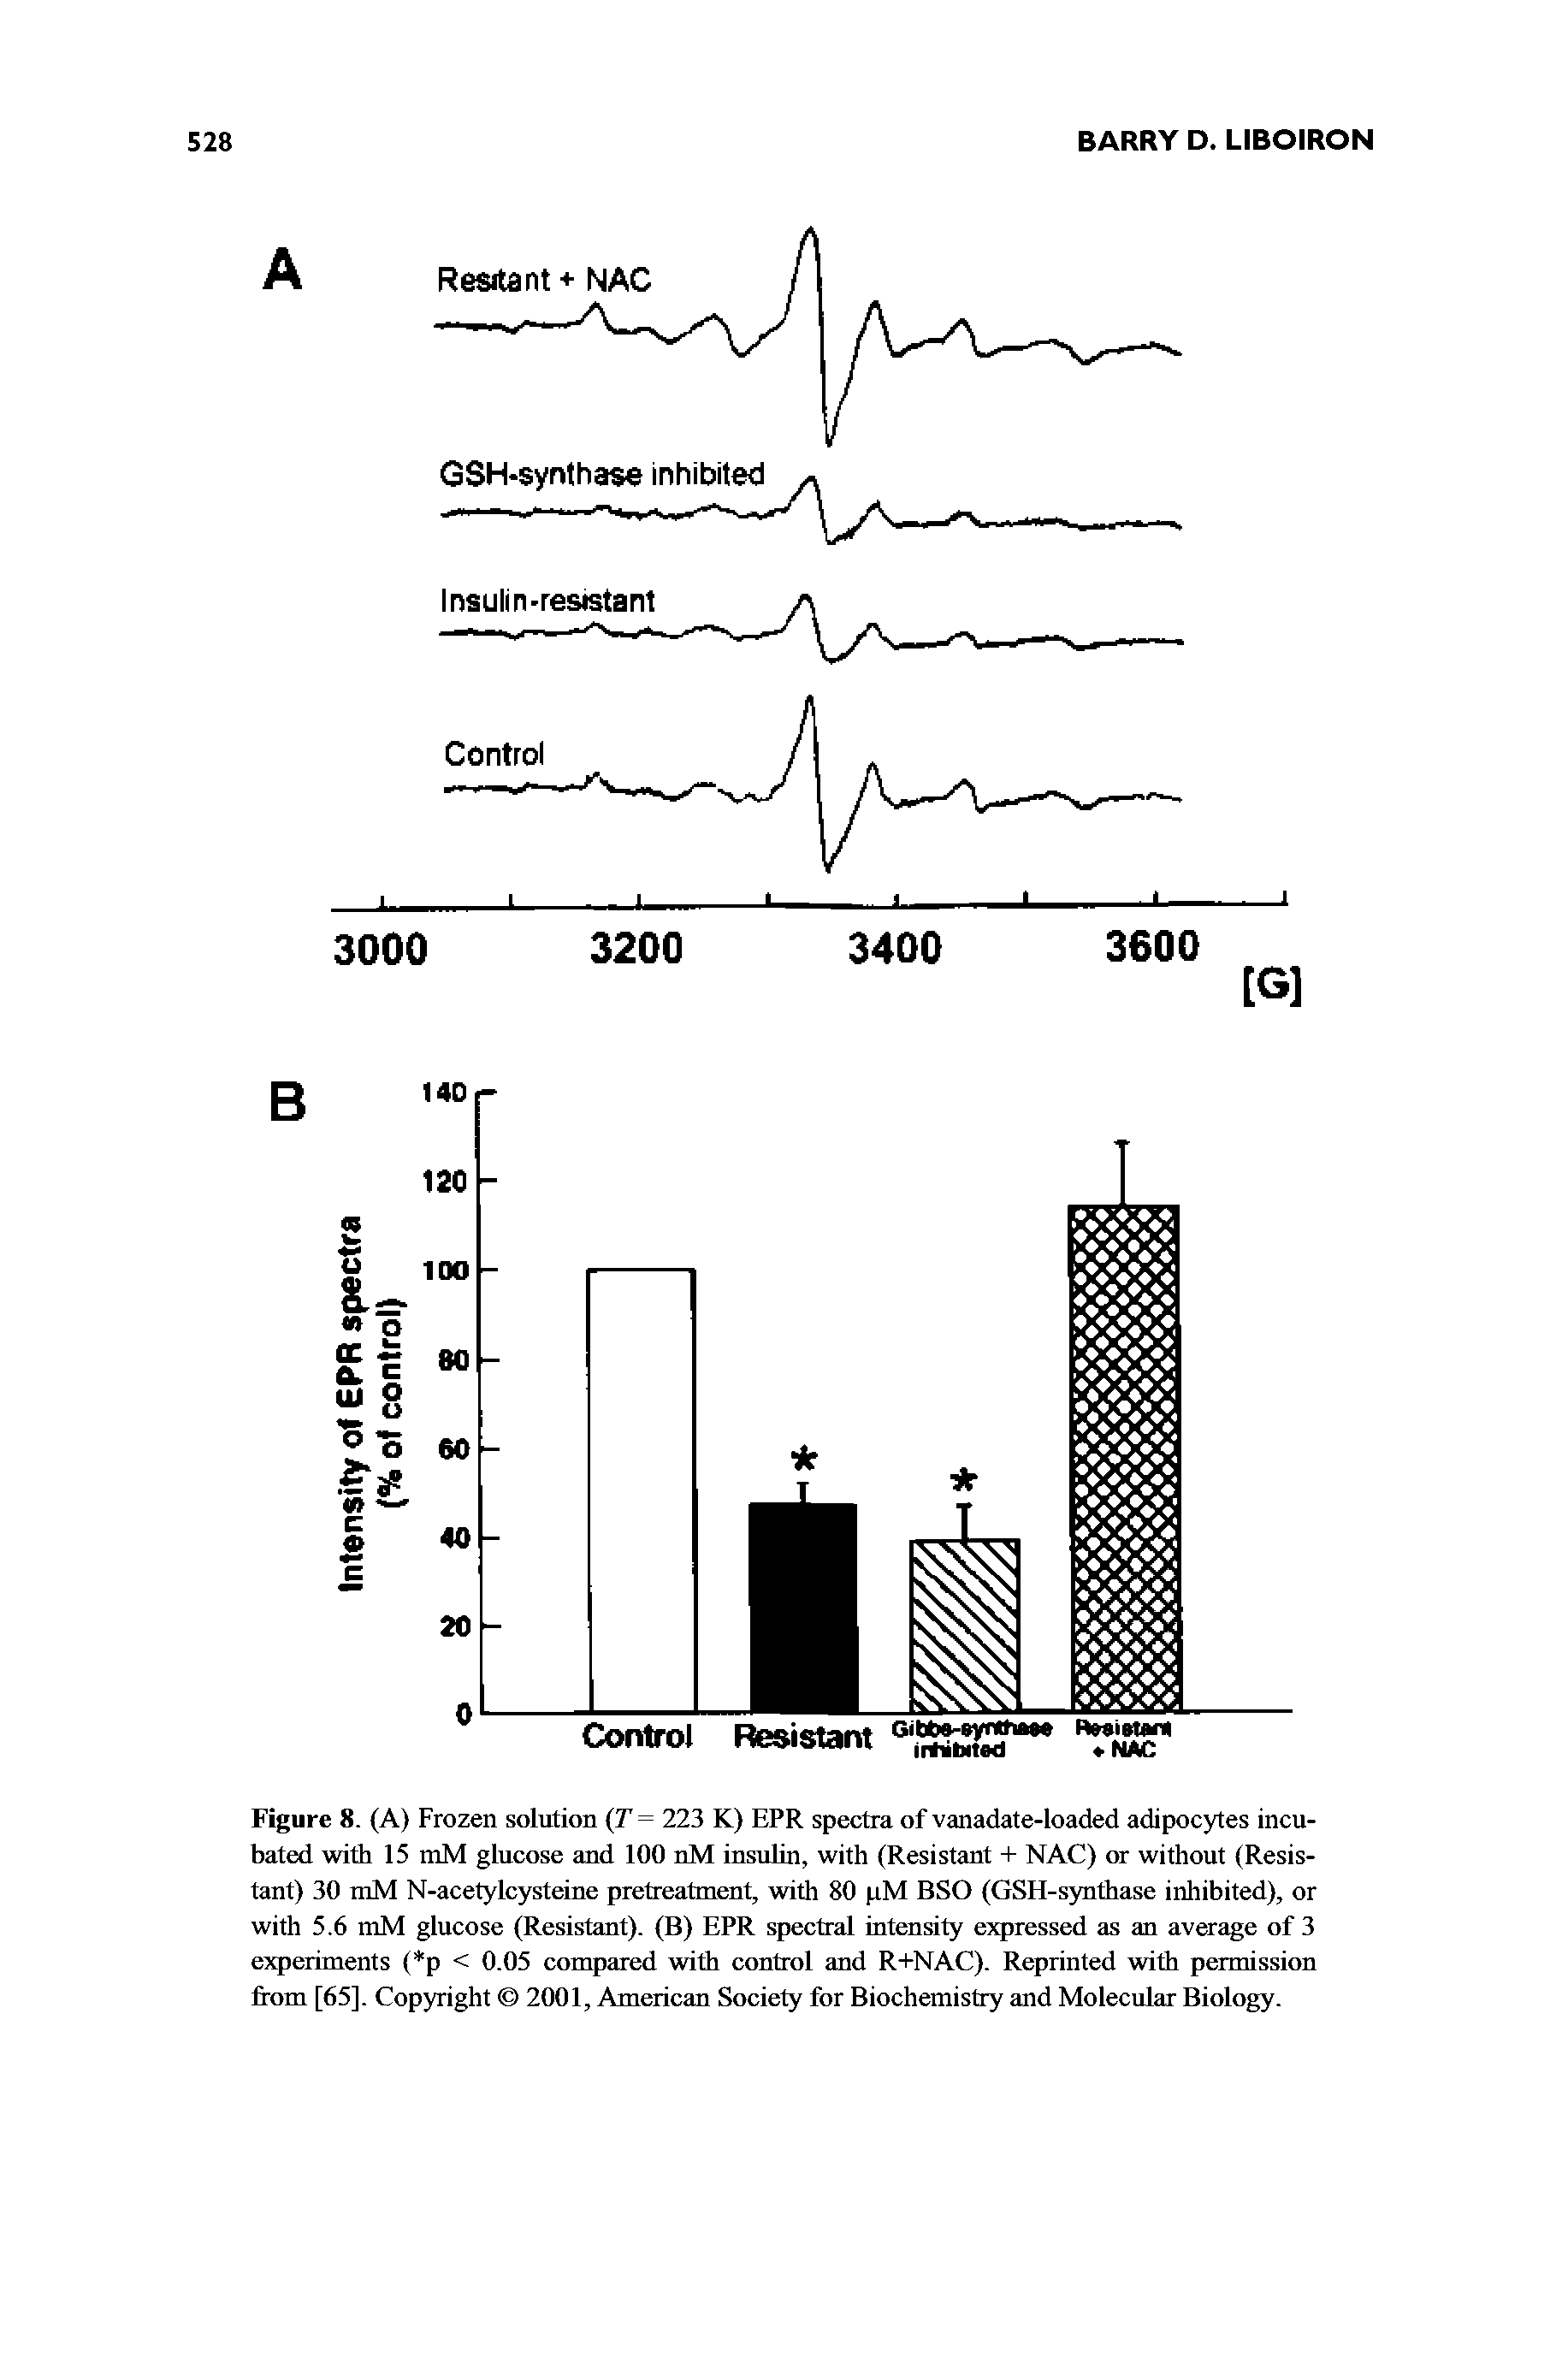 Figure 8. (A) Frozen solution (T = 223 K) EPR spectra of vanadate-loaded adipocytes incubated with 15 mM glucose and 100 nM insulin, with (Resistant + NAC) or without (Resistant) 30 mM N-acetylcysteine pretreatment, with 80 pM BSO (GSH-synthase inhibited), or with 5.6 mM glucose (Resistant). (B) EPR spectral intensity expressed as an average of 3 experiments ( p < 0.05 compared with control and R+NAC). Reprinted with permission from [65]. Copyright 2001, American Society for Biochemistry and Molecular Biology.